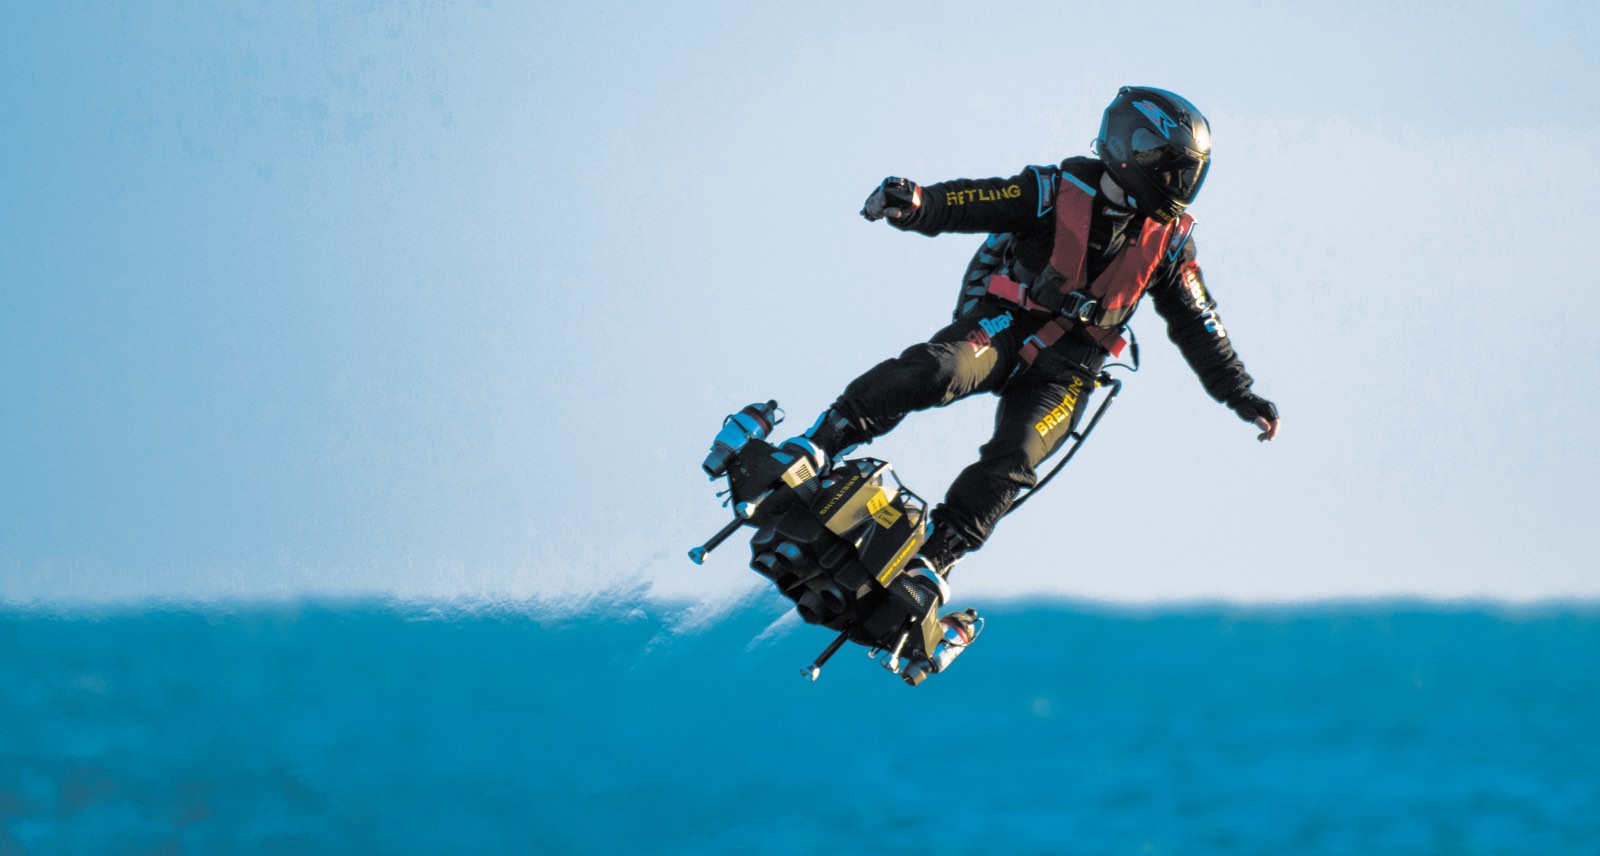 An image of Franky Zapata on a FlyboardAir